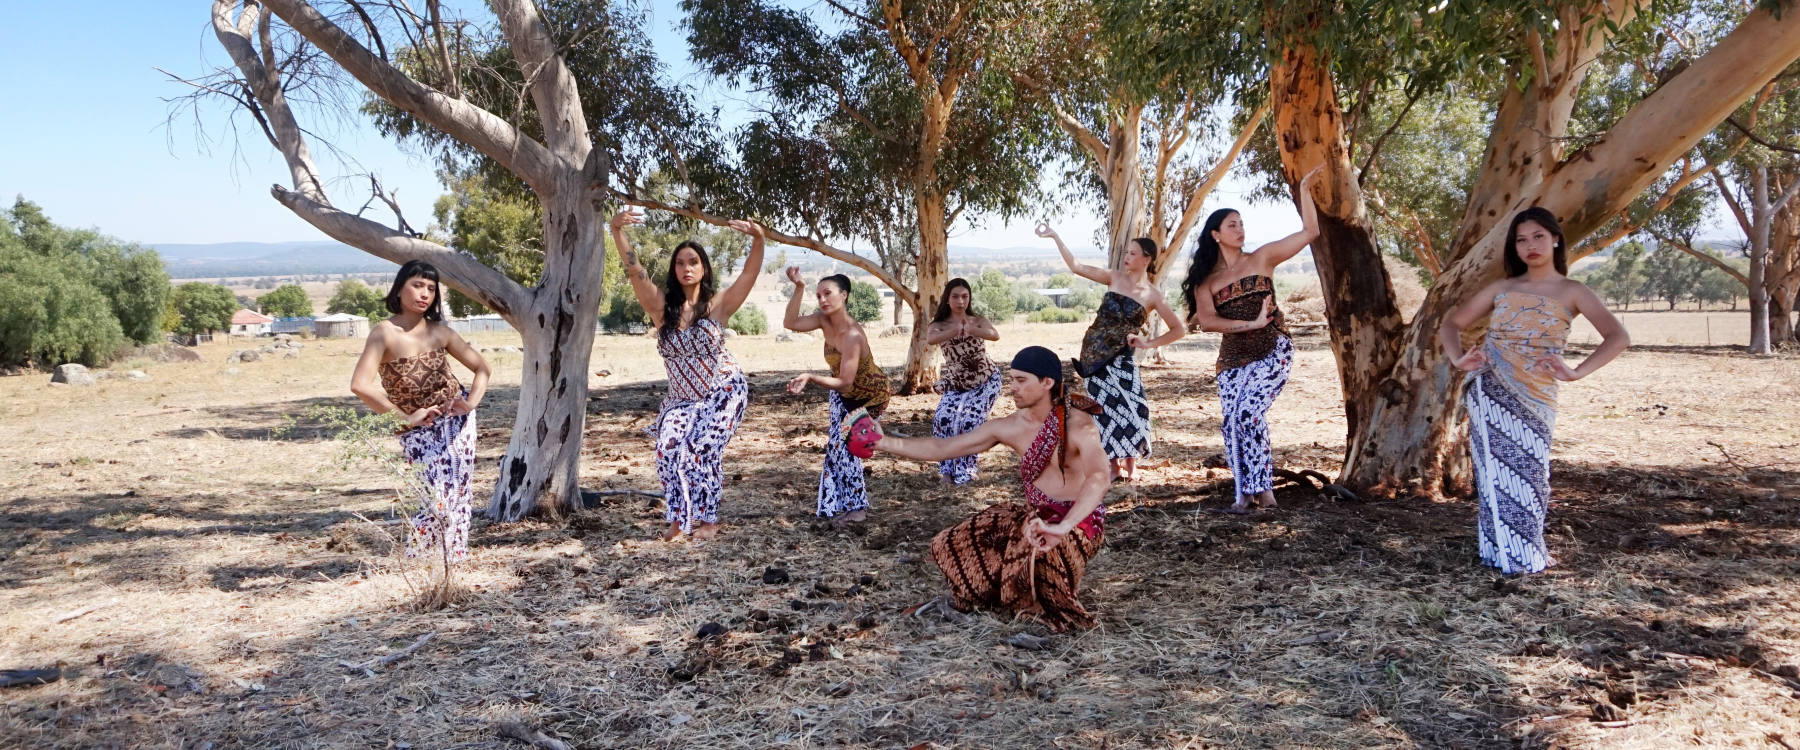 A group of eight performers stand in a natural Australian landscape, surrounded by eucalypt trees. The performers wear various styles of Indonesian costume and are posing in a variety of ways using their hands, arms and feet to create unique shapes